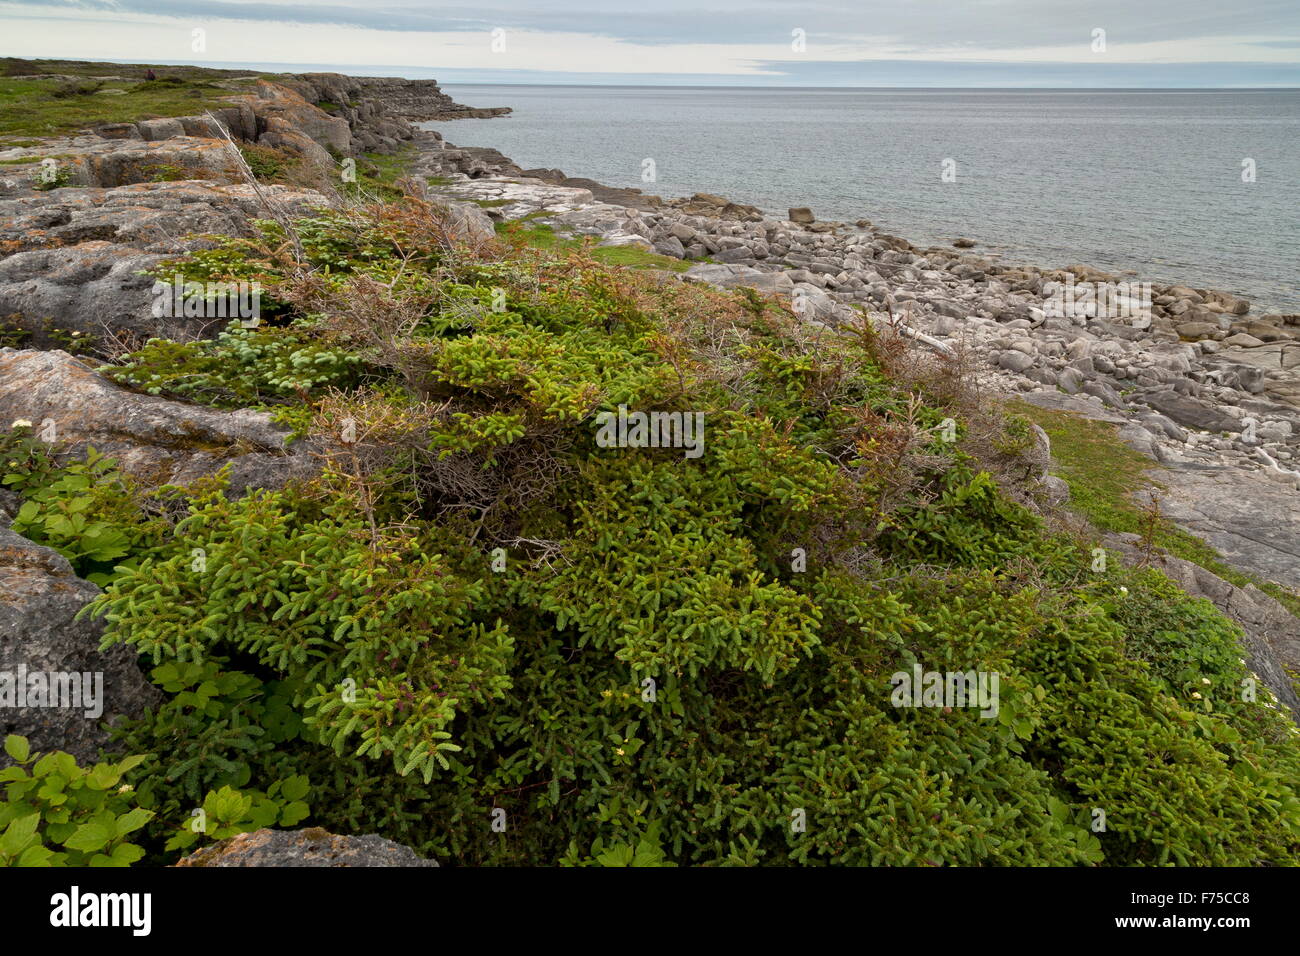 Dwarfed woody vegetation, known as Tuckamore or Krumholz, of White Spruce, on the west coast of Newfoundland. Stock Photo